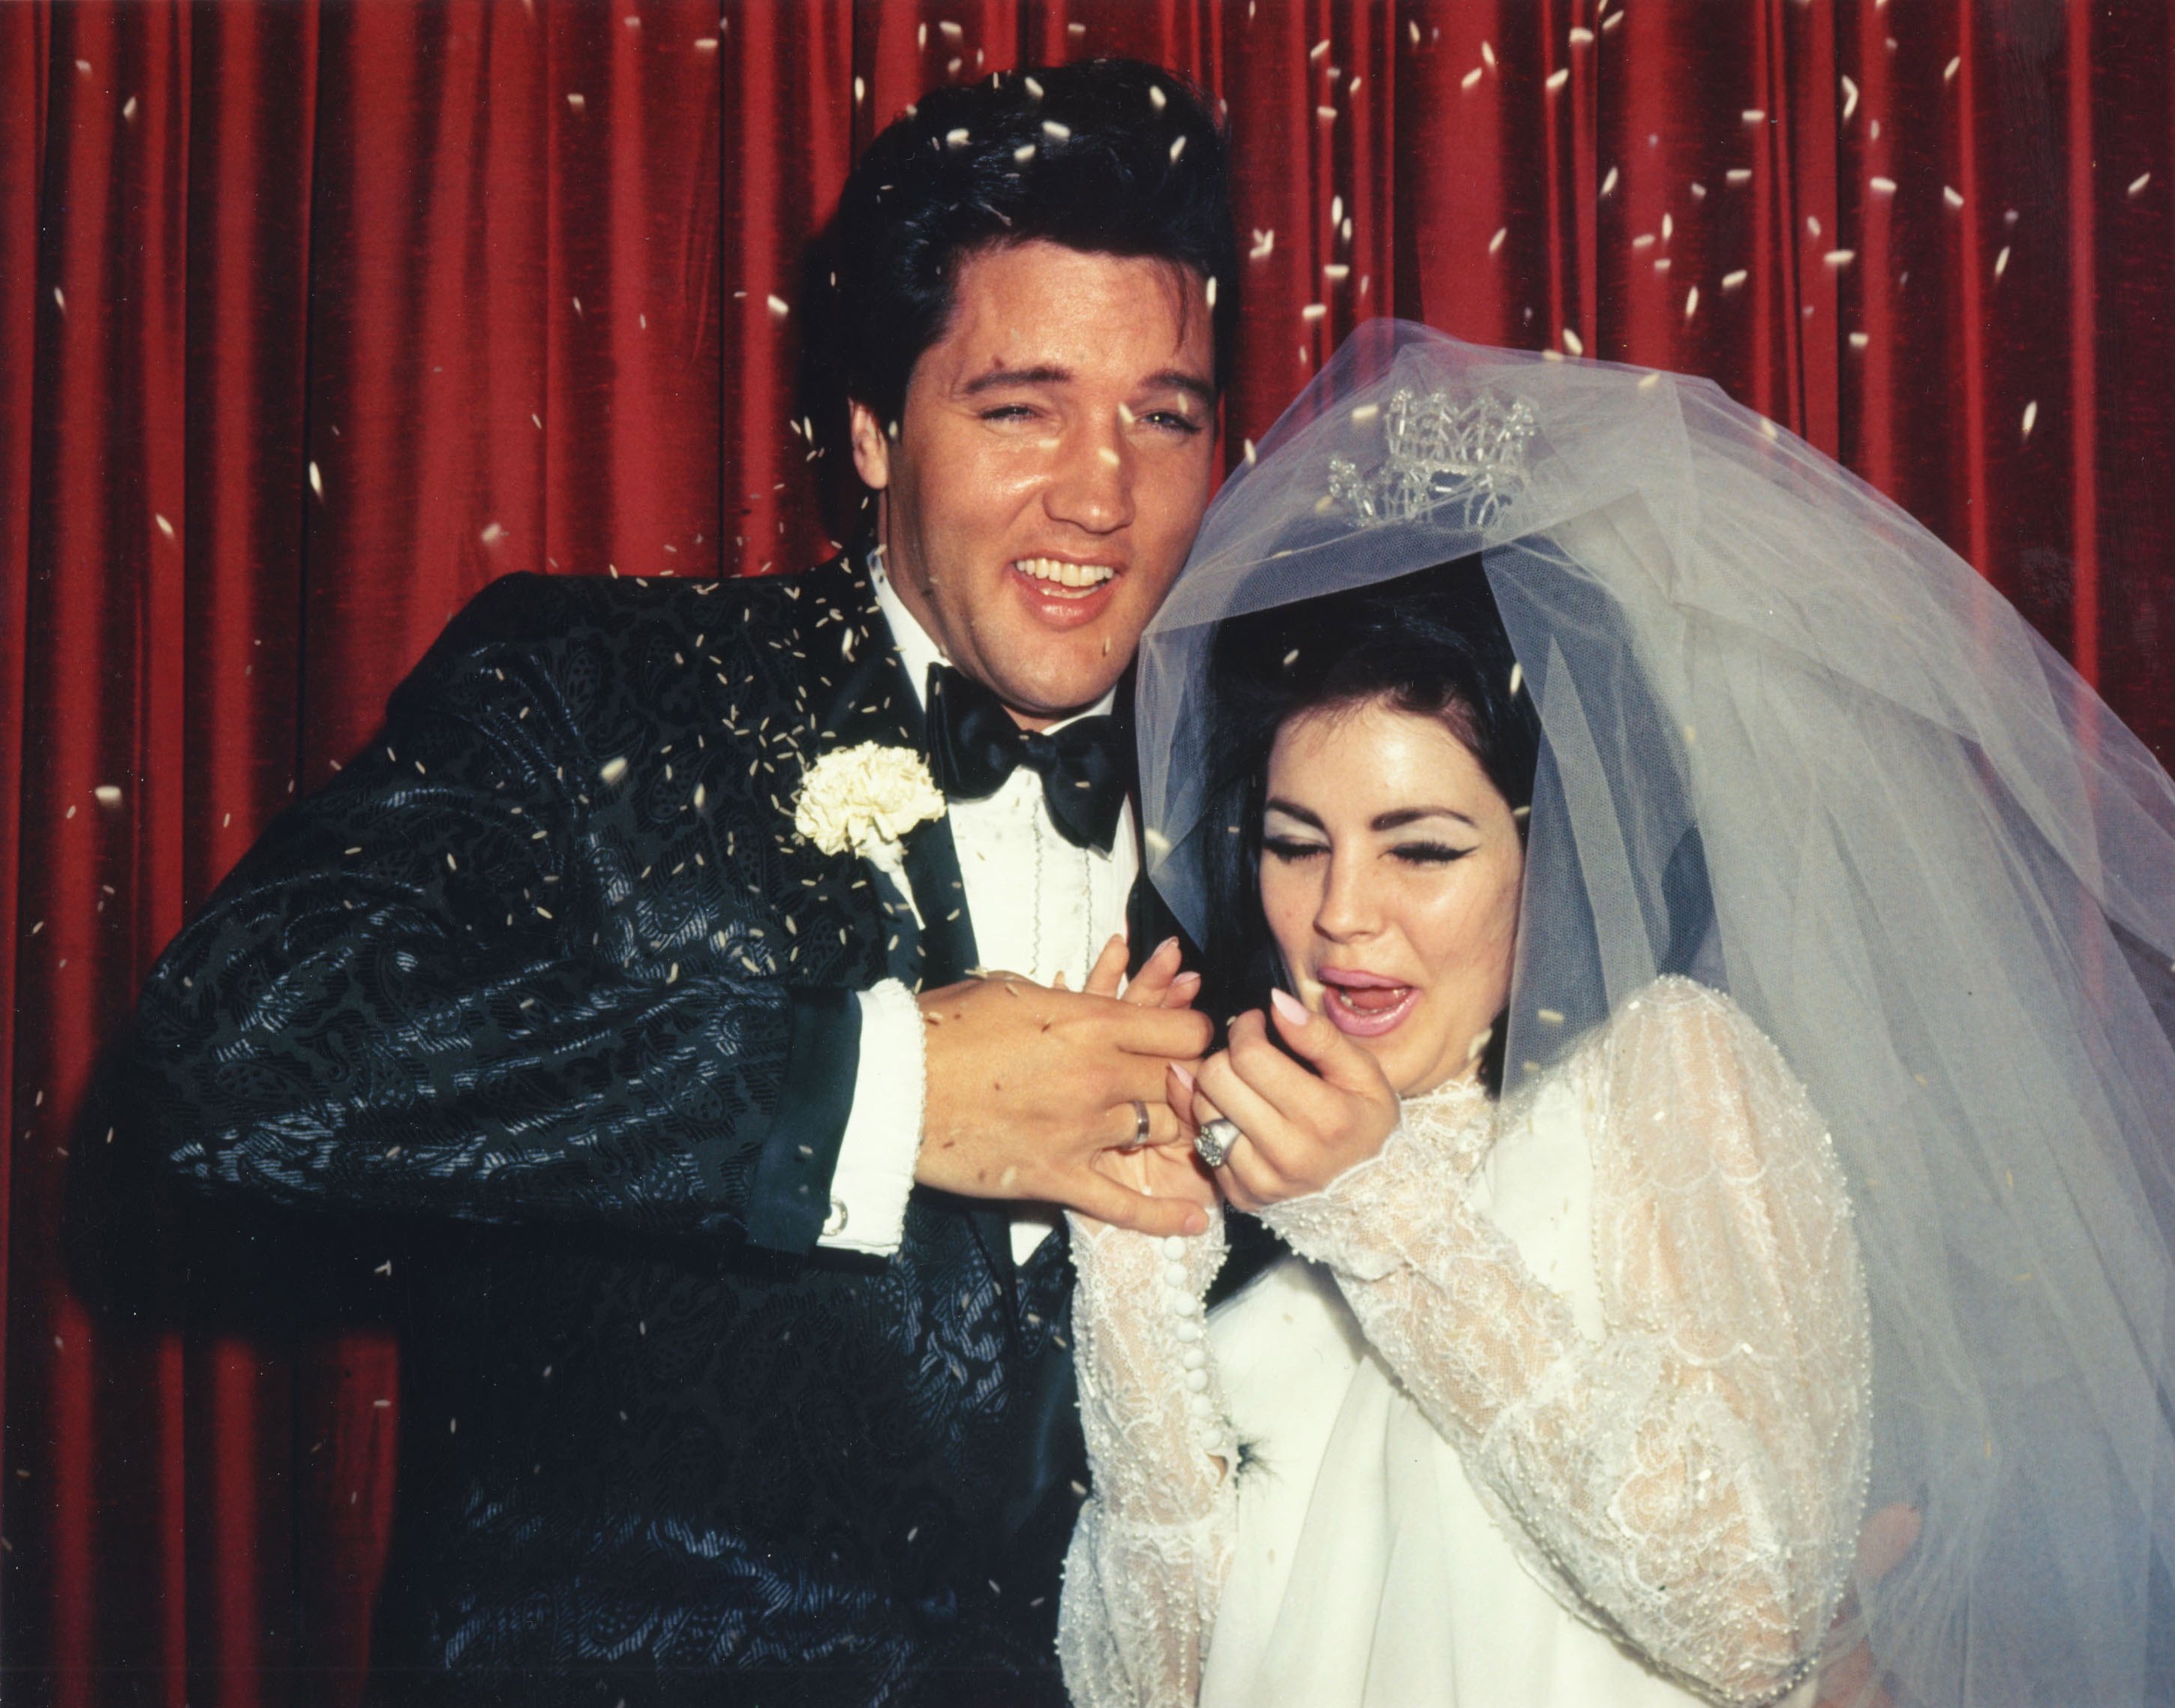 Elvis Presley and Priscilla Presley during their wedding on May 01,1967 | Source: Getty Images